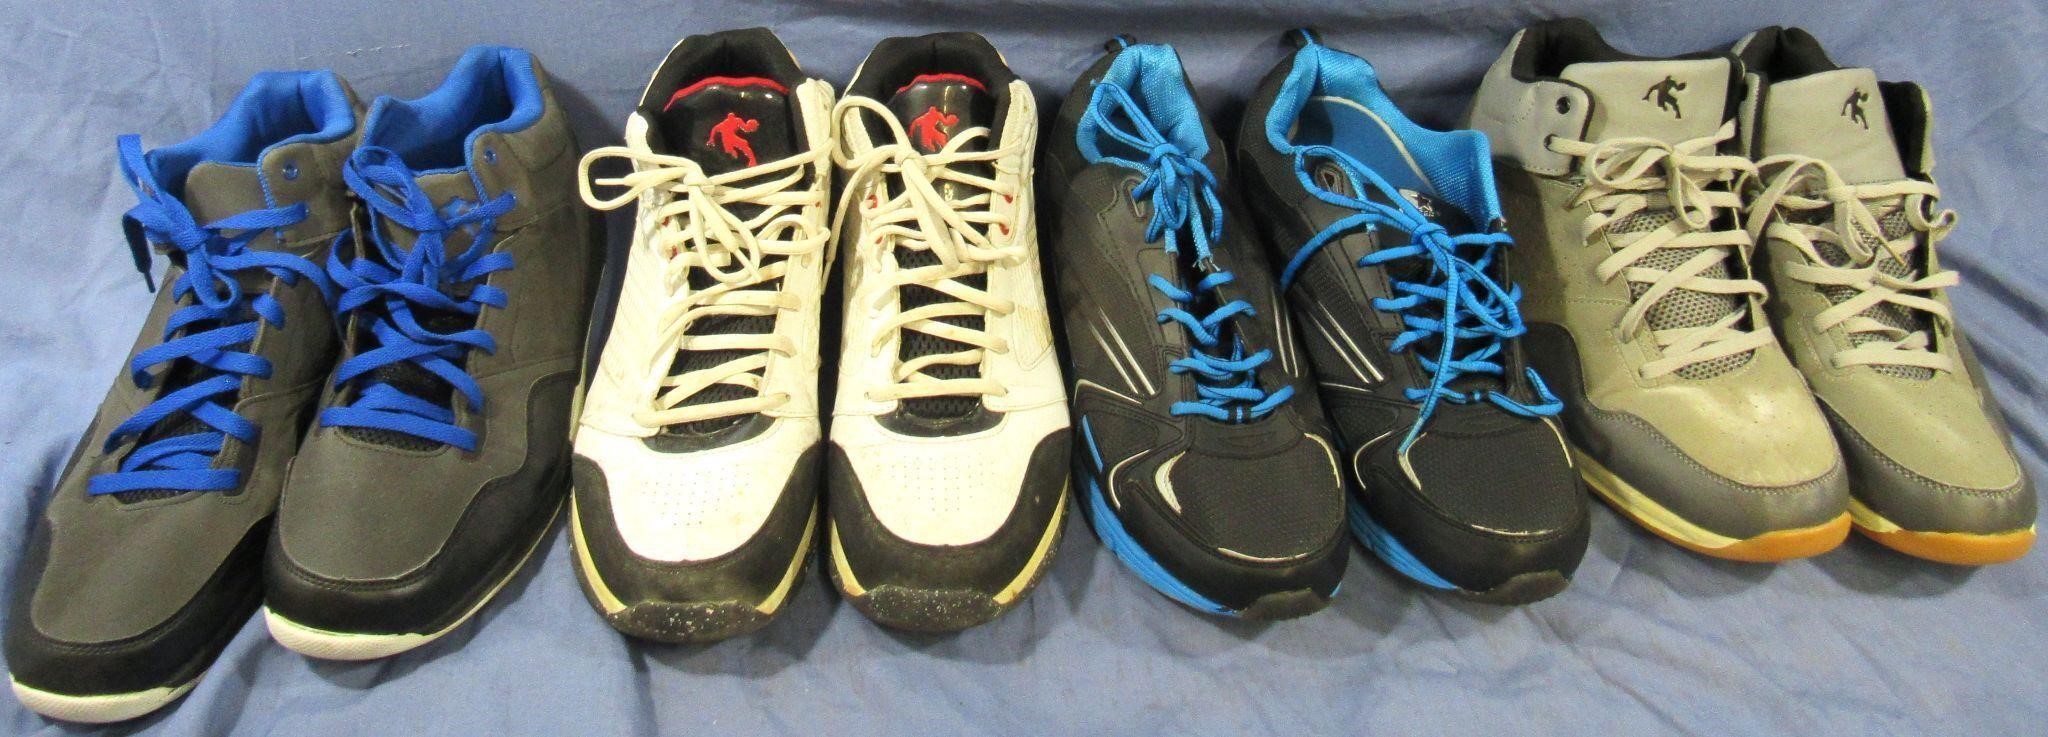 4 PAIRS OF SIZE 13 AND1 AND STARTER SHOES